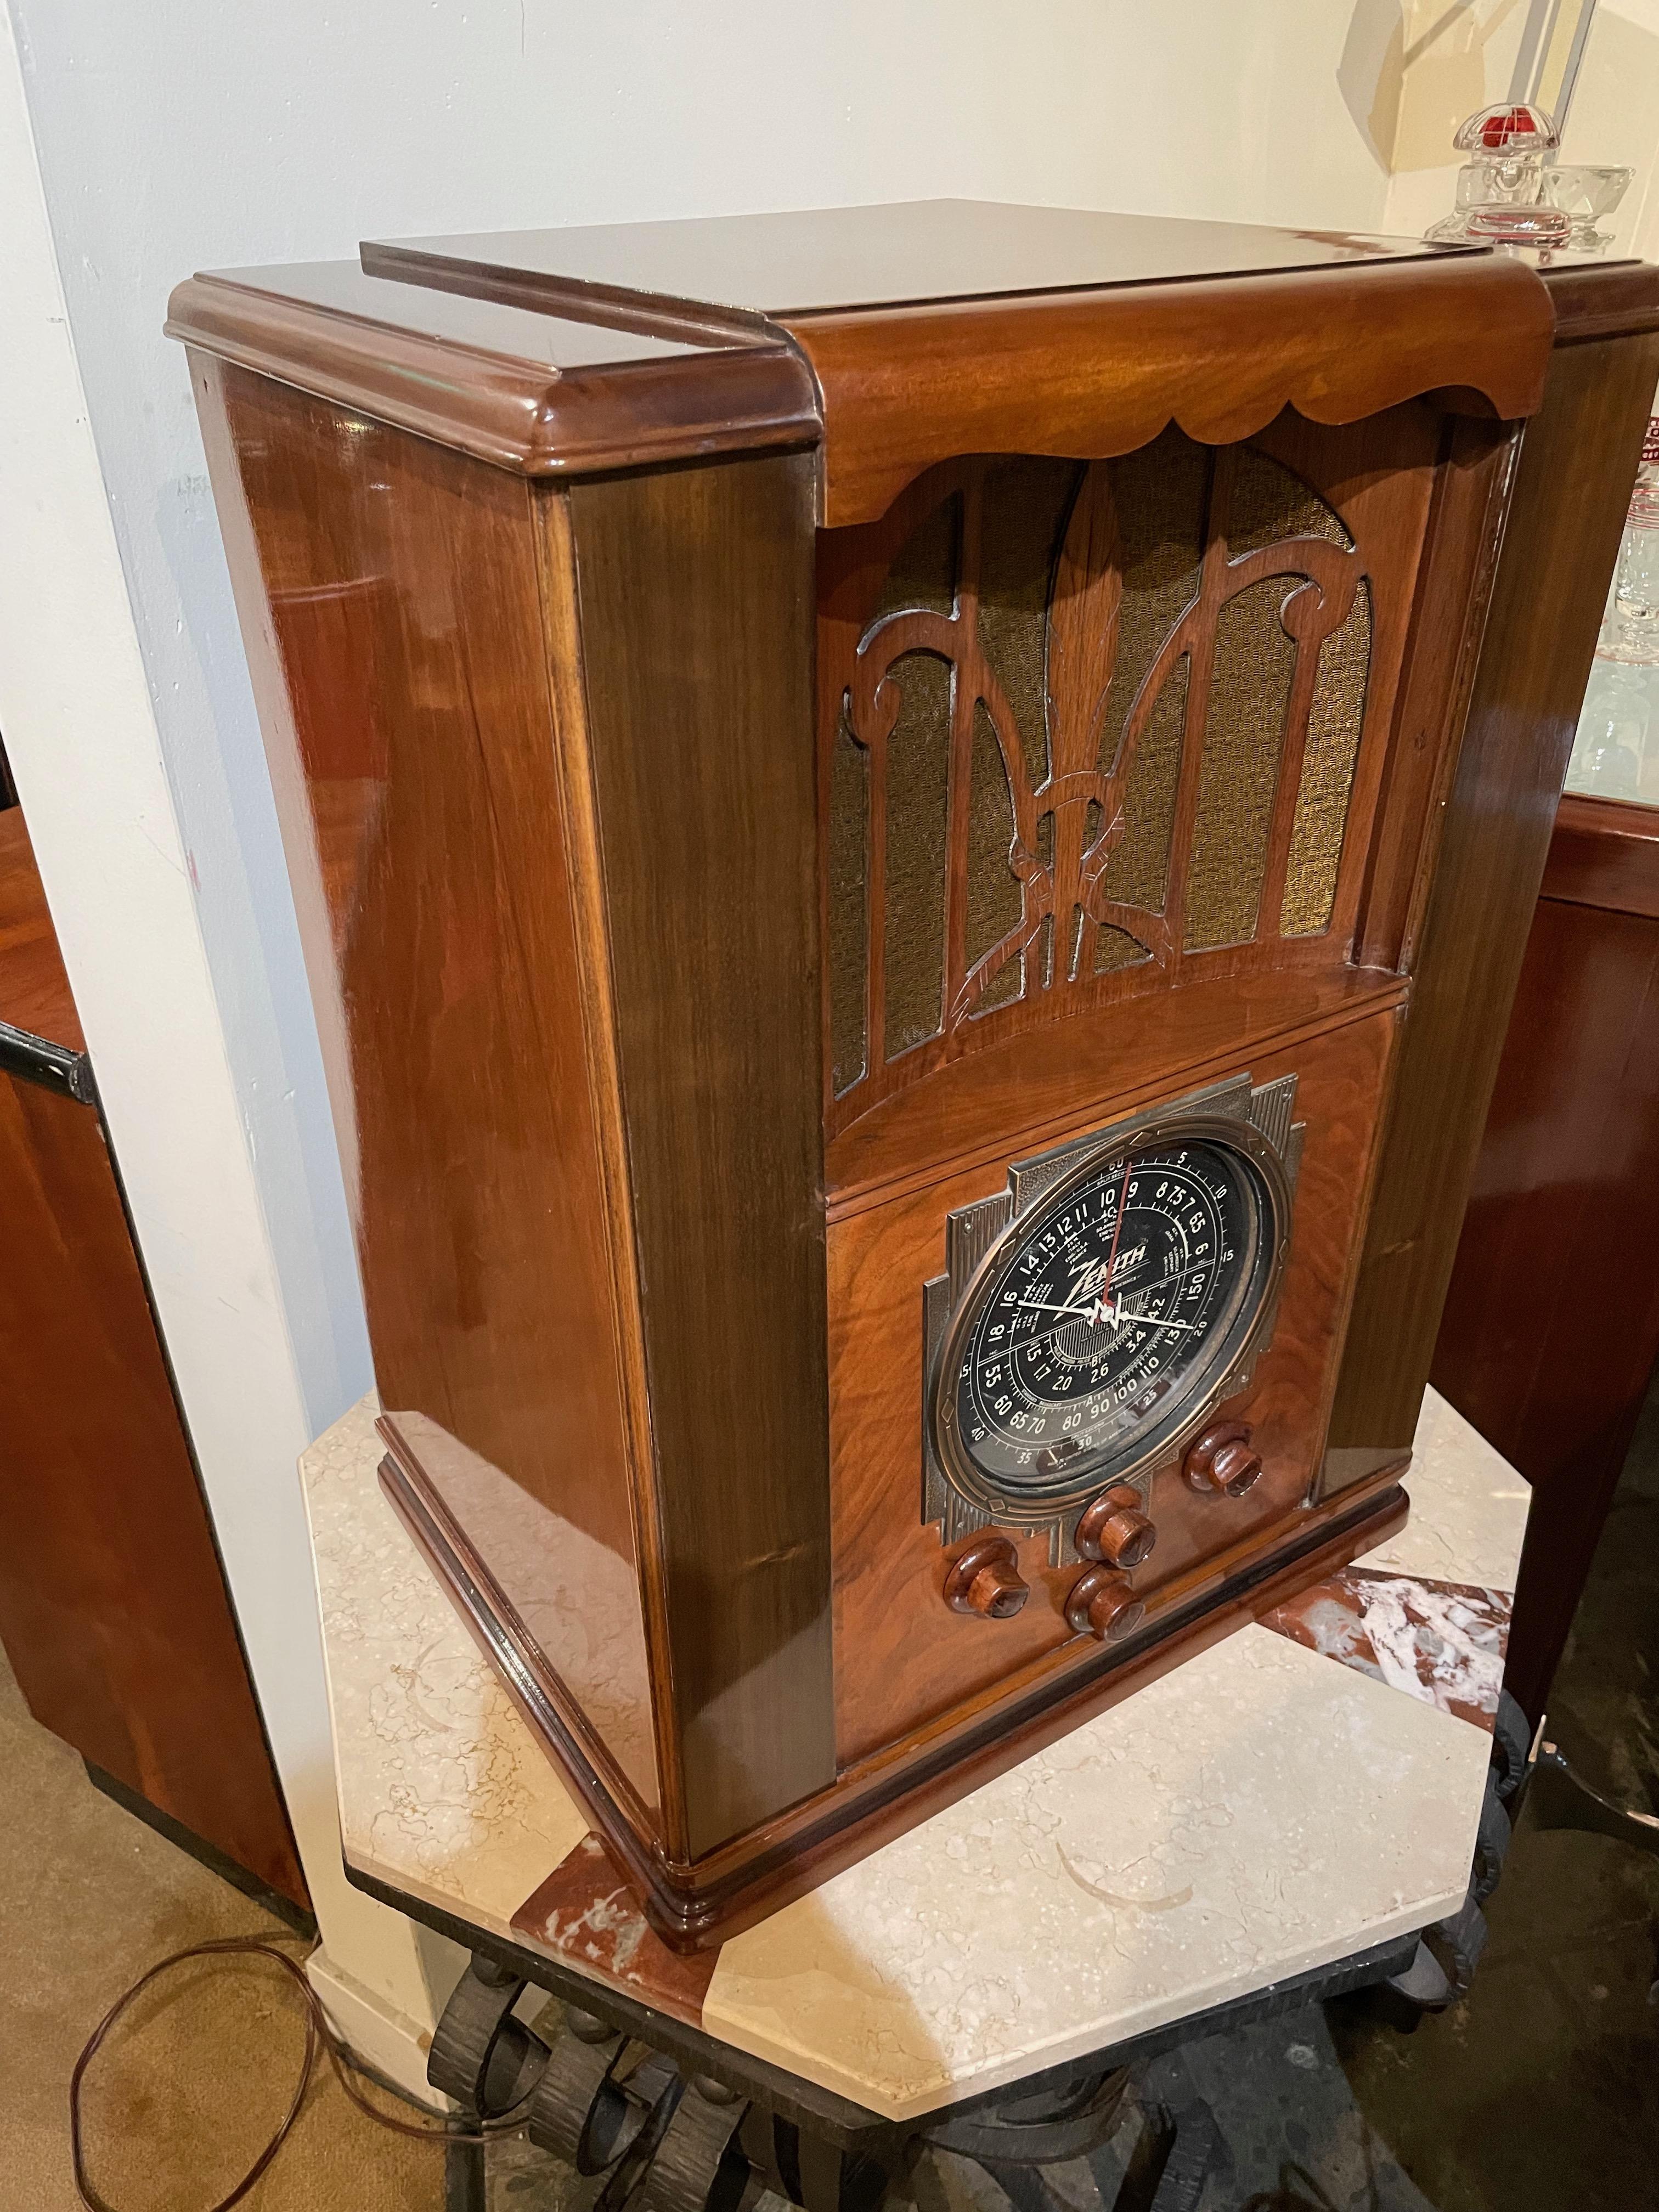 1936 Zenith tombstone model 6-S-27. The radio is a spectacular combination of angles and veneers, with the iconic multi-colored and oversized dial. This radio is one of the large tombstone cabinets offering a full range 8-inch speaker and a